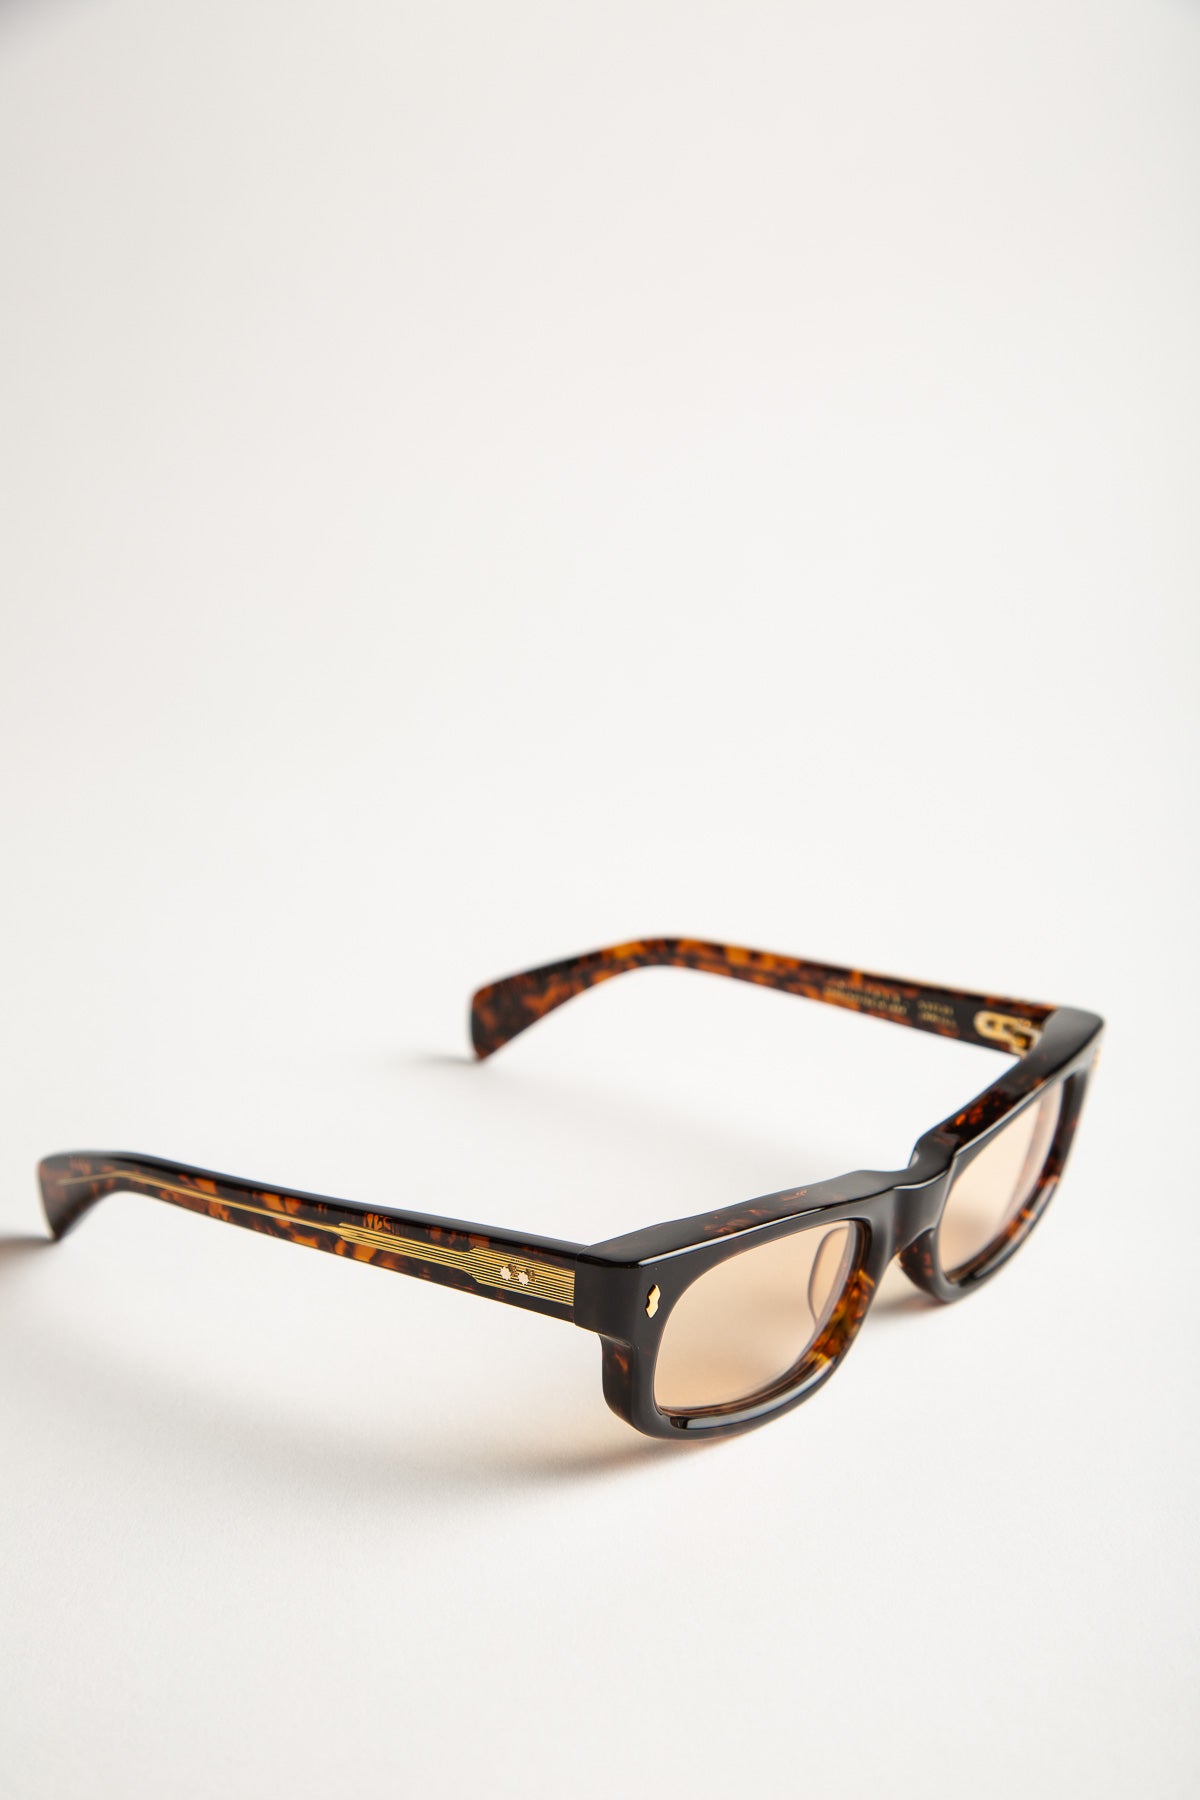 JACQUES MARIE MAGE | INITIALS SUNGLASSES